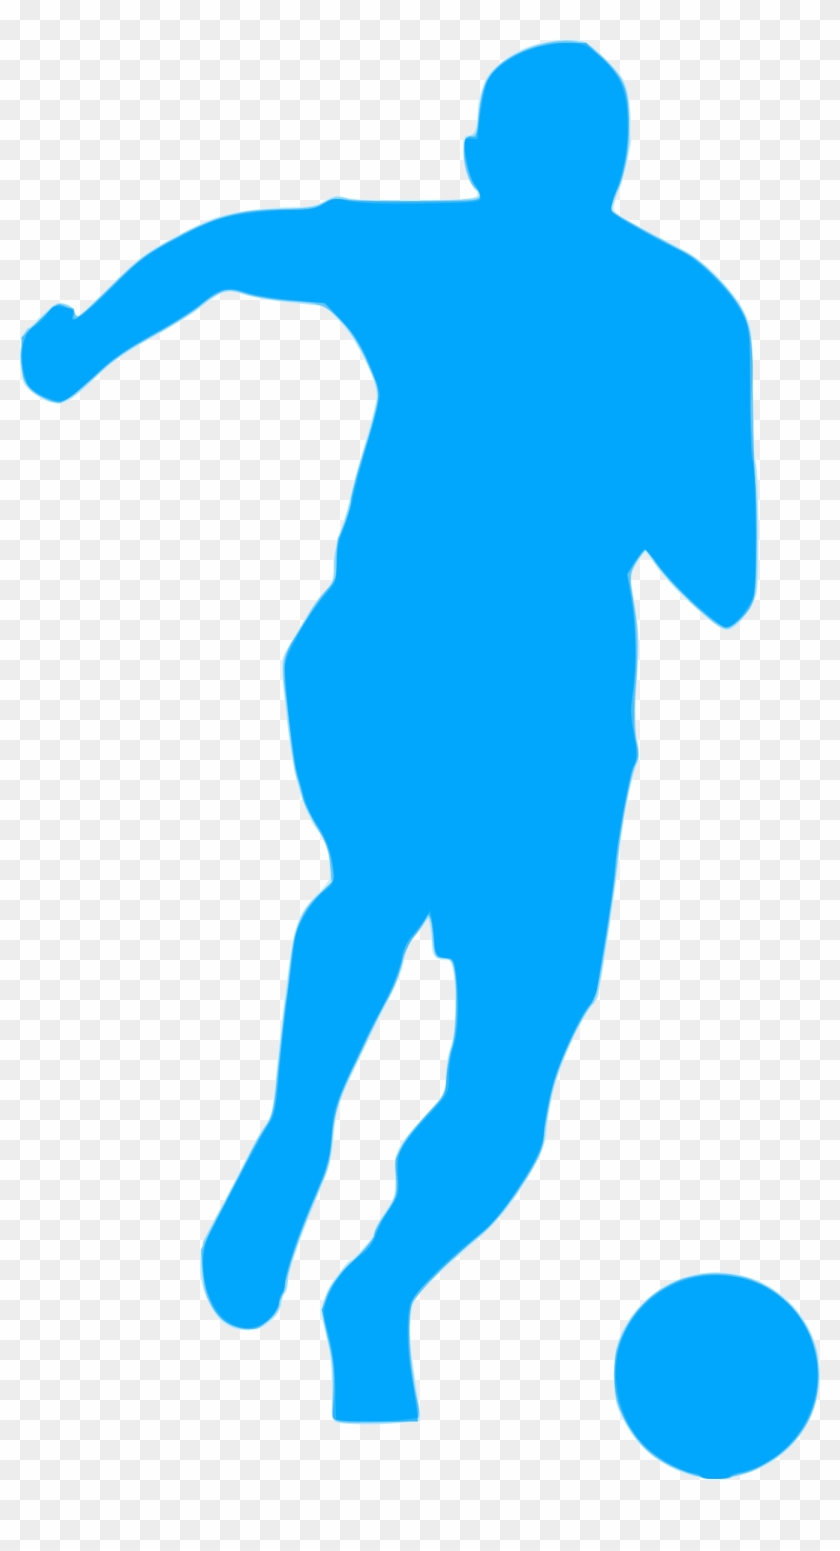 This Free Icons Png Design Of Silhouette Football 27 - Football Icon Blue Png Clipart #5538128